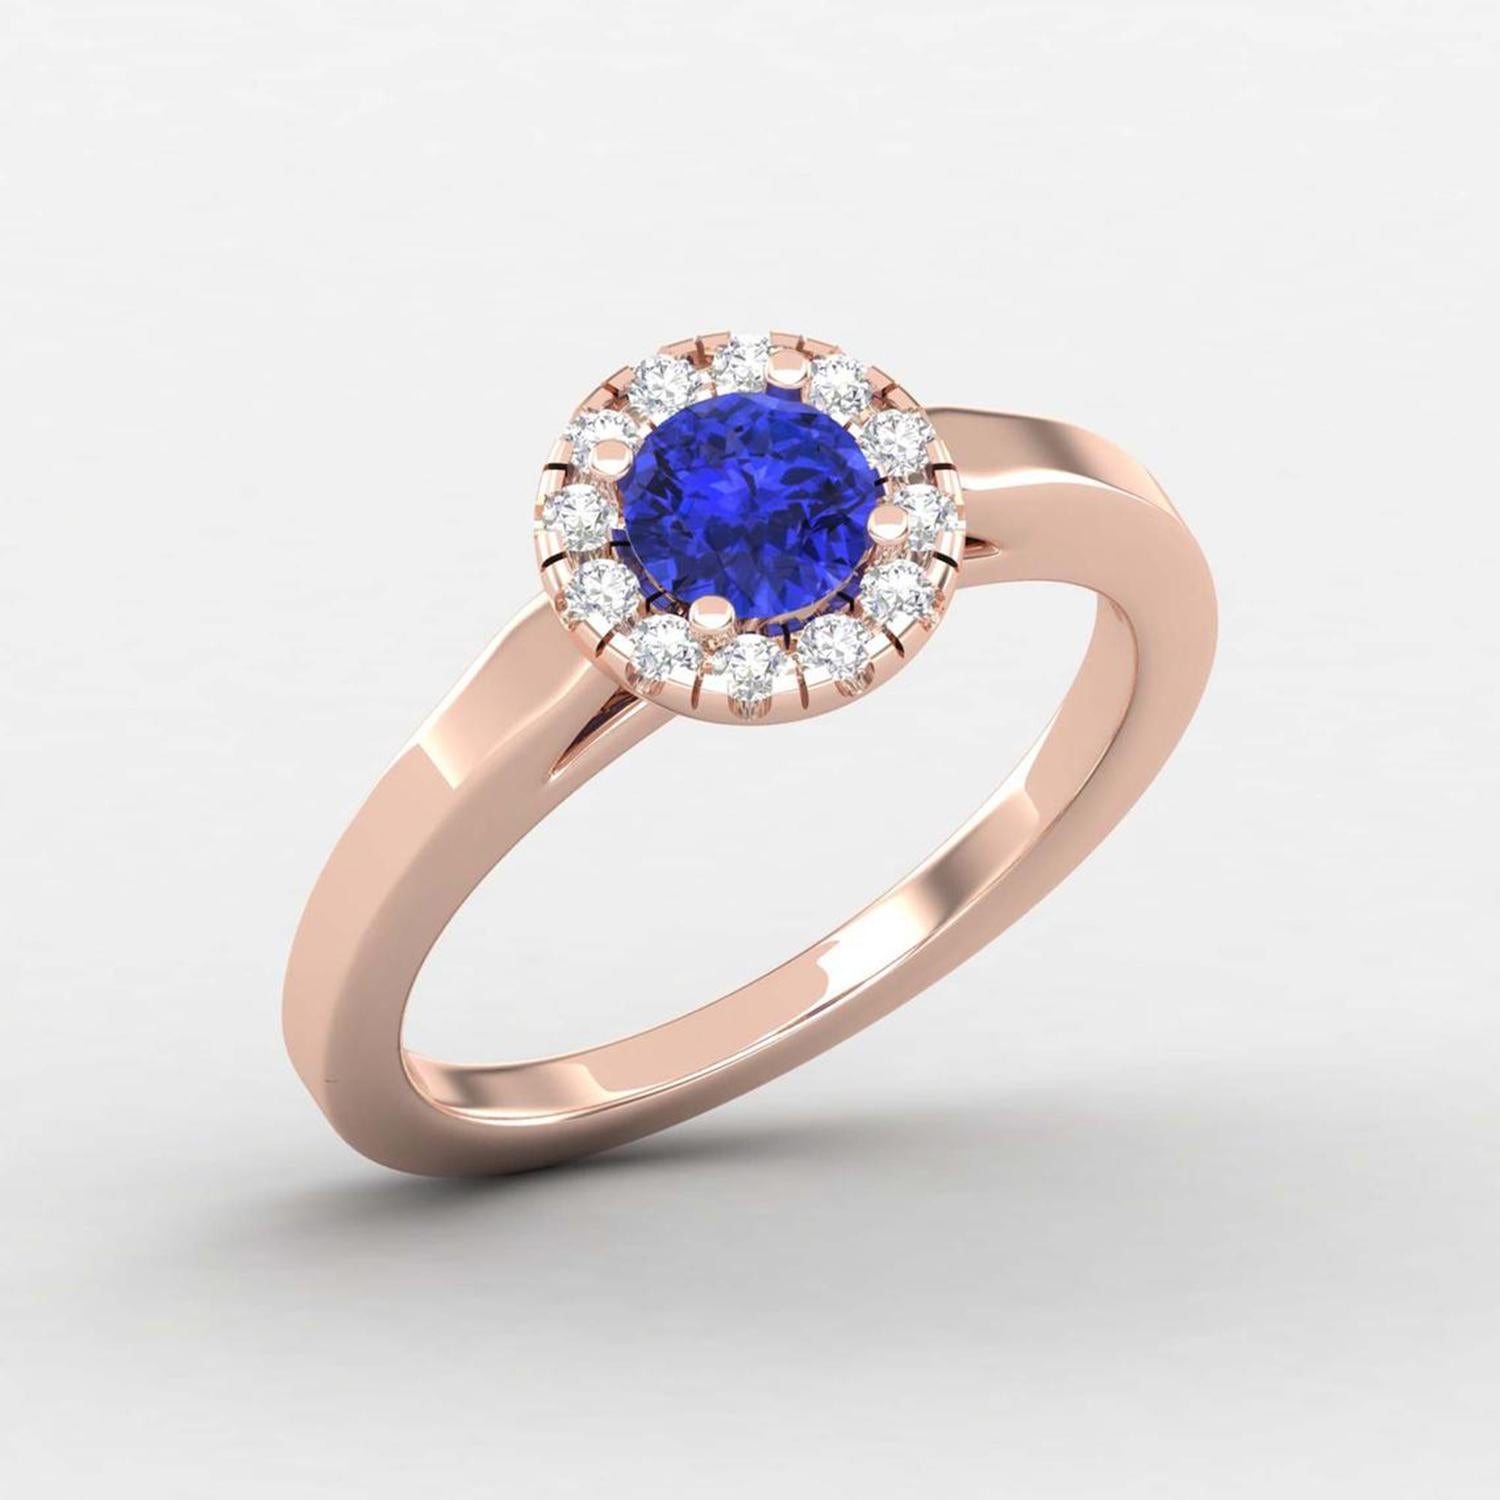 Women's 14 Karat Gold Tanzanite Ring / Diamond Solitaire Ring / Ring for Her For Sale